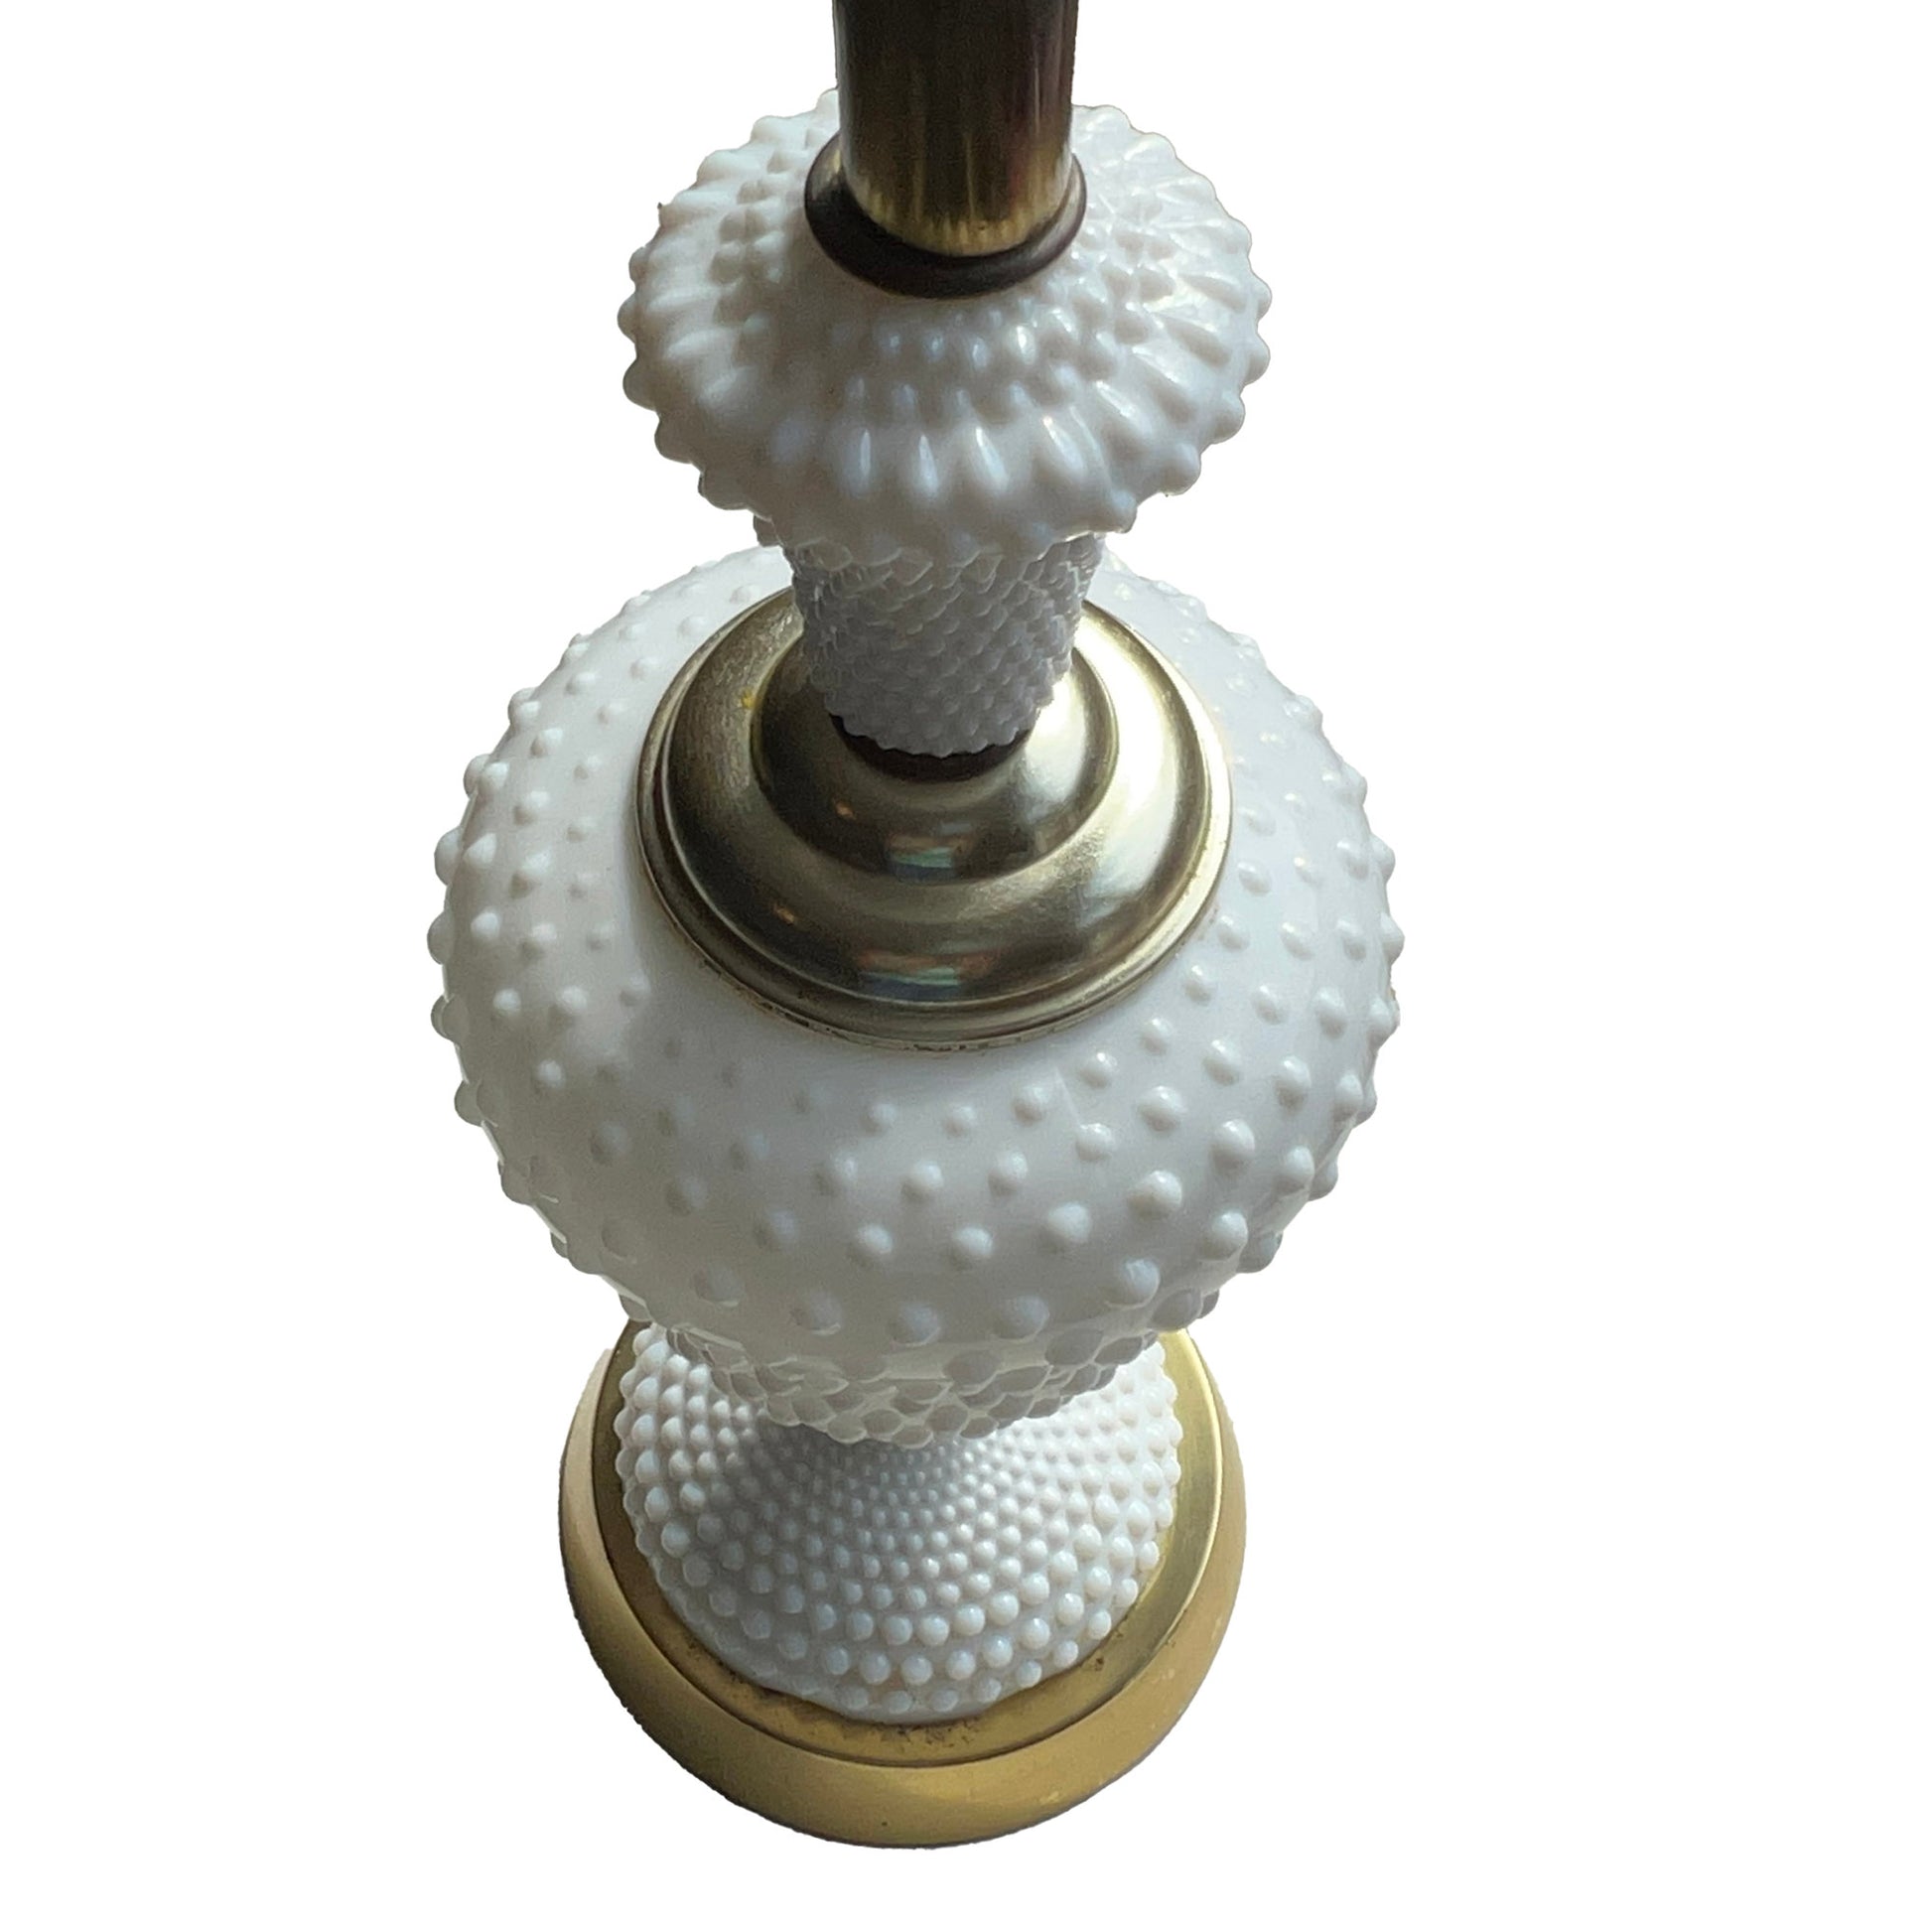 Vintage-Milk-Glass-Hobnail-Tall-Table-Lamp.-View-from-Top.-Shop-eBargainsAndDeals.com